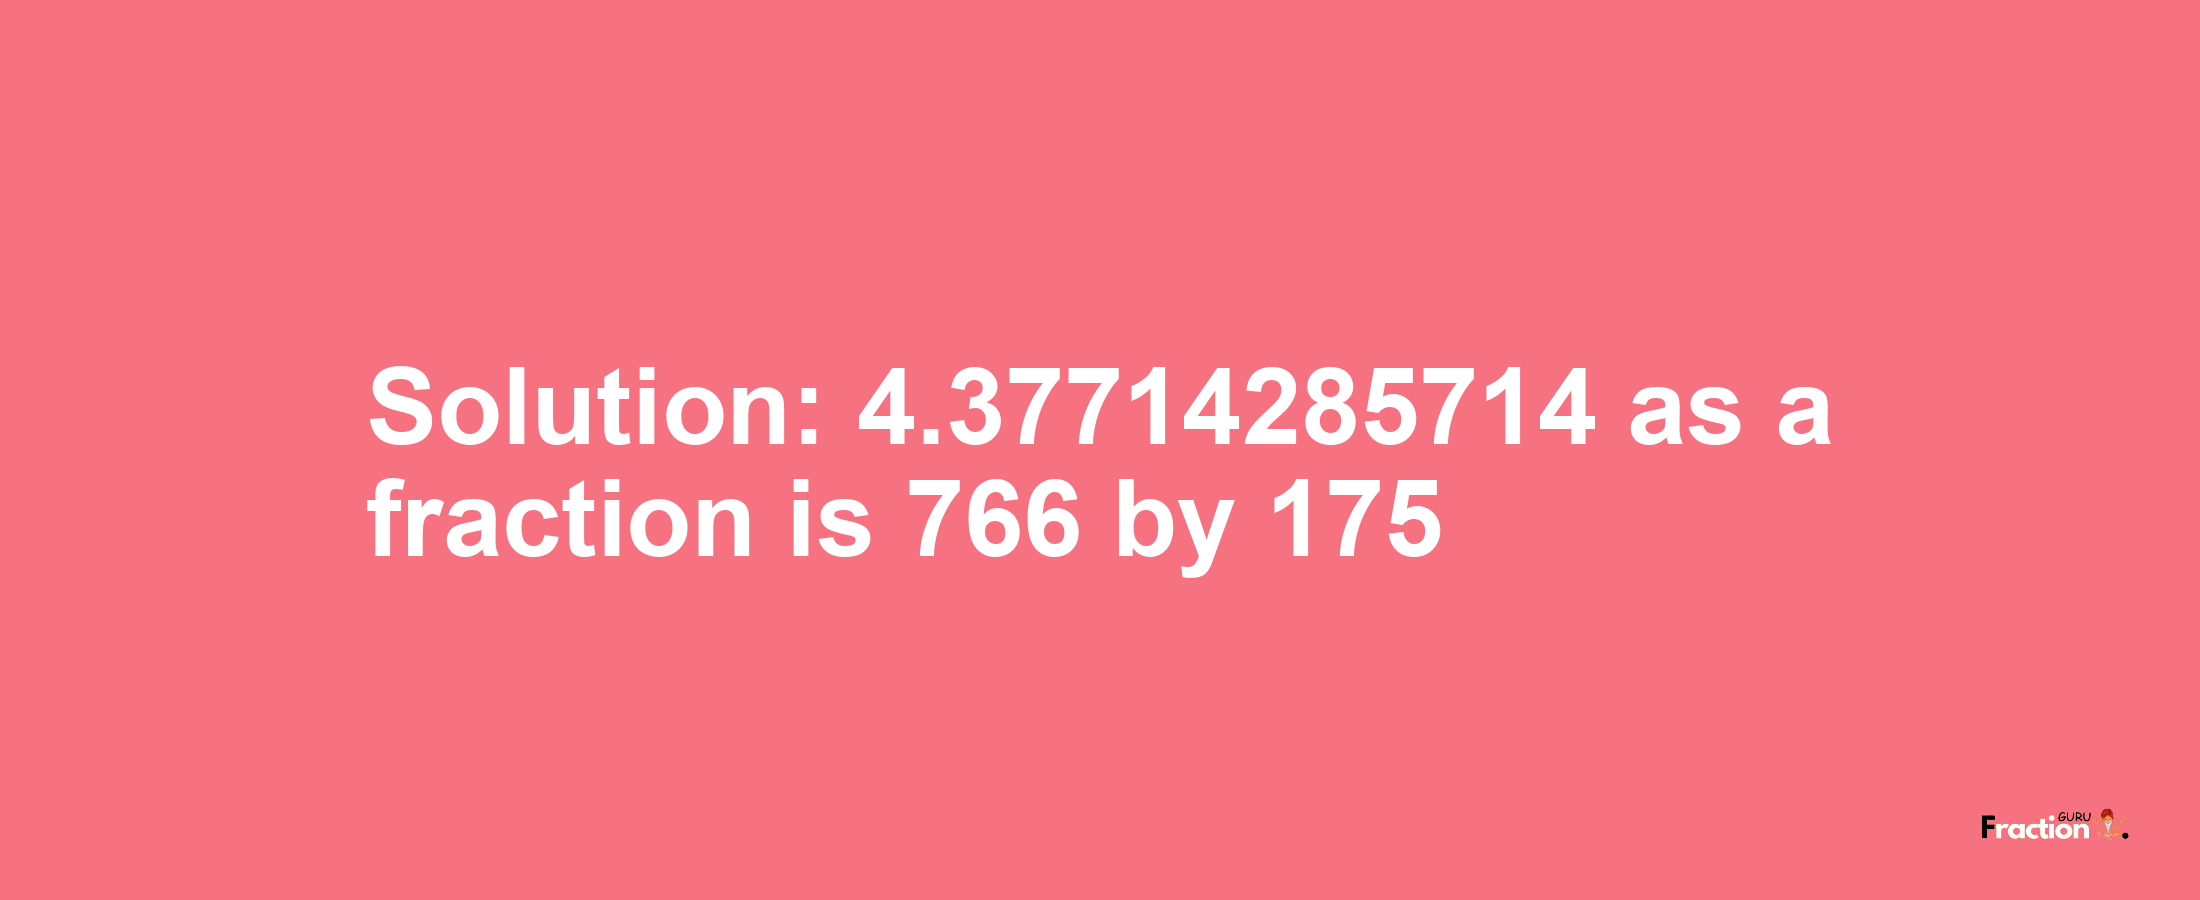 Solution:4.37714285714 as a fraction is 766/175